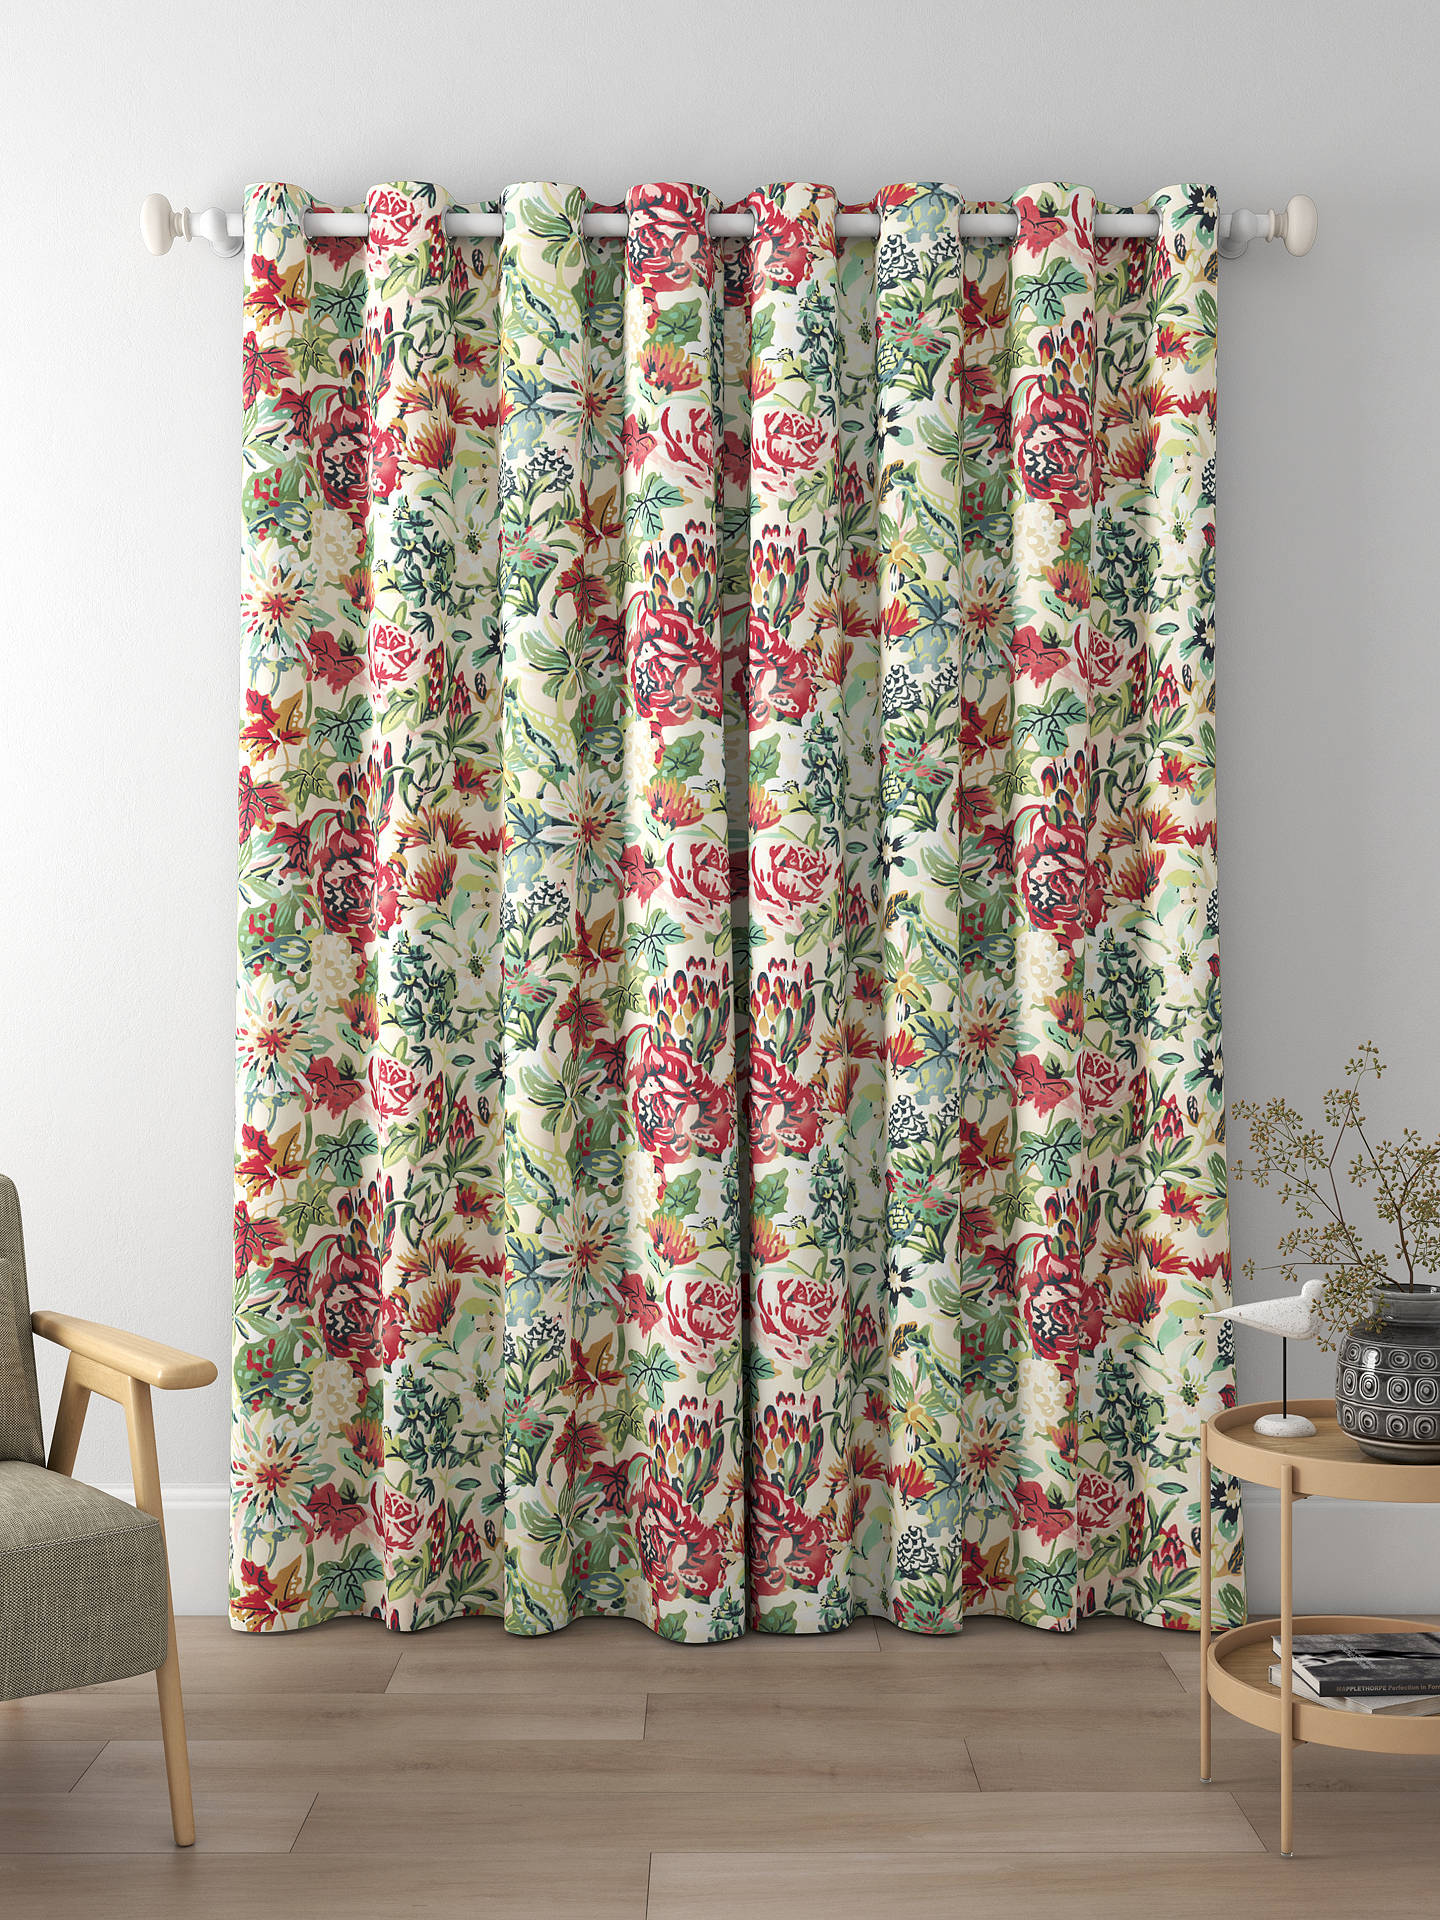 Harlequin Perennials Made to Measure Curtains, Pistachio/Tree Canopy